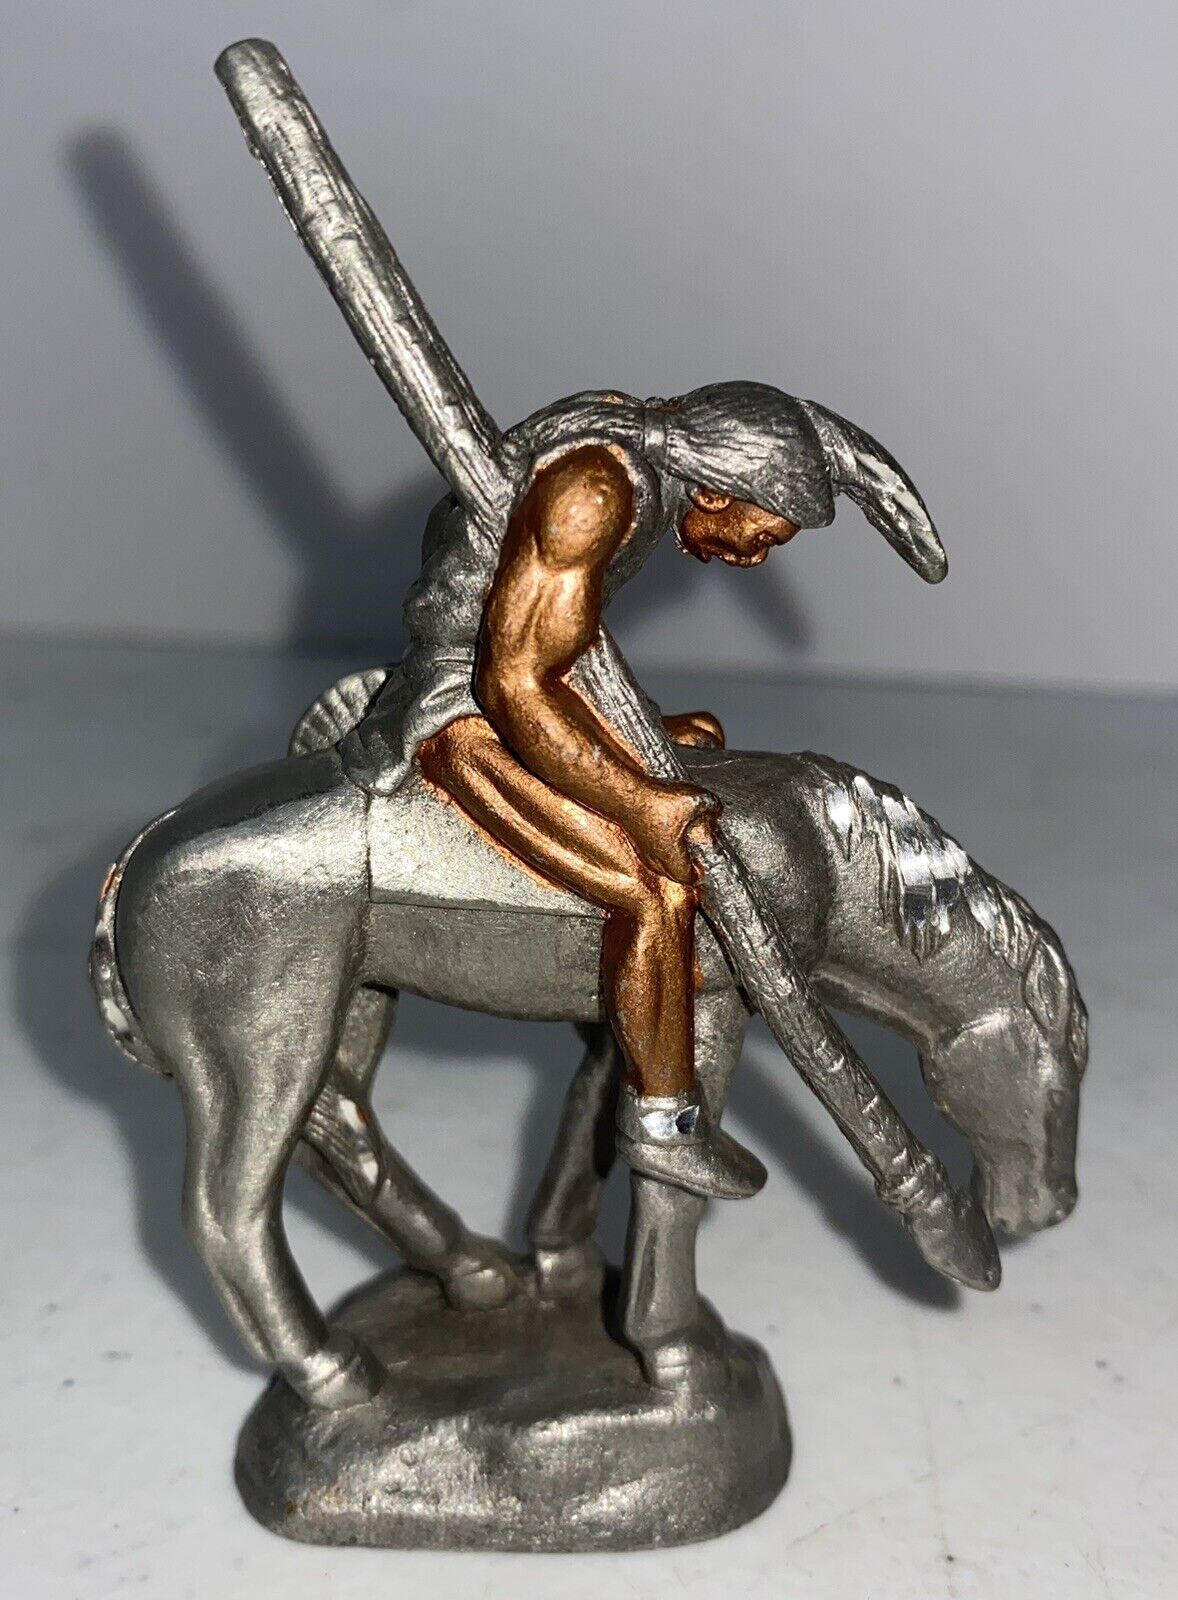 VTG Spoontiques Pewter Indian The End Of The Trail Statue Figure 3” PP1166 Rare